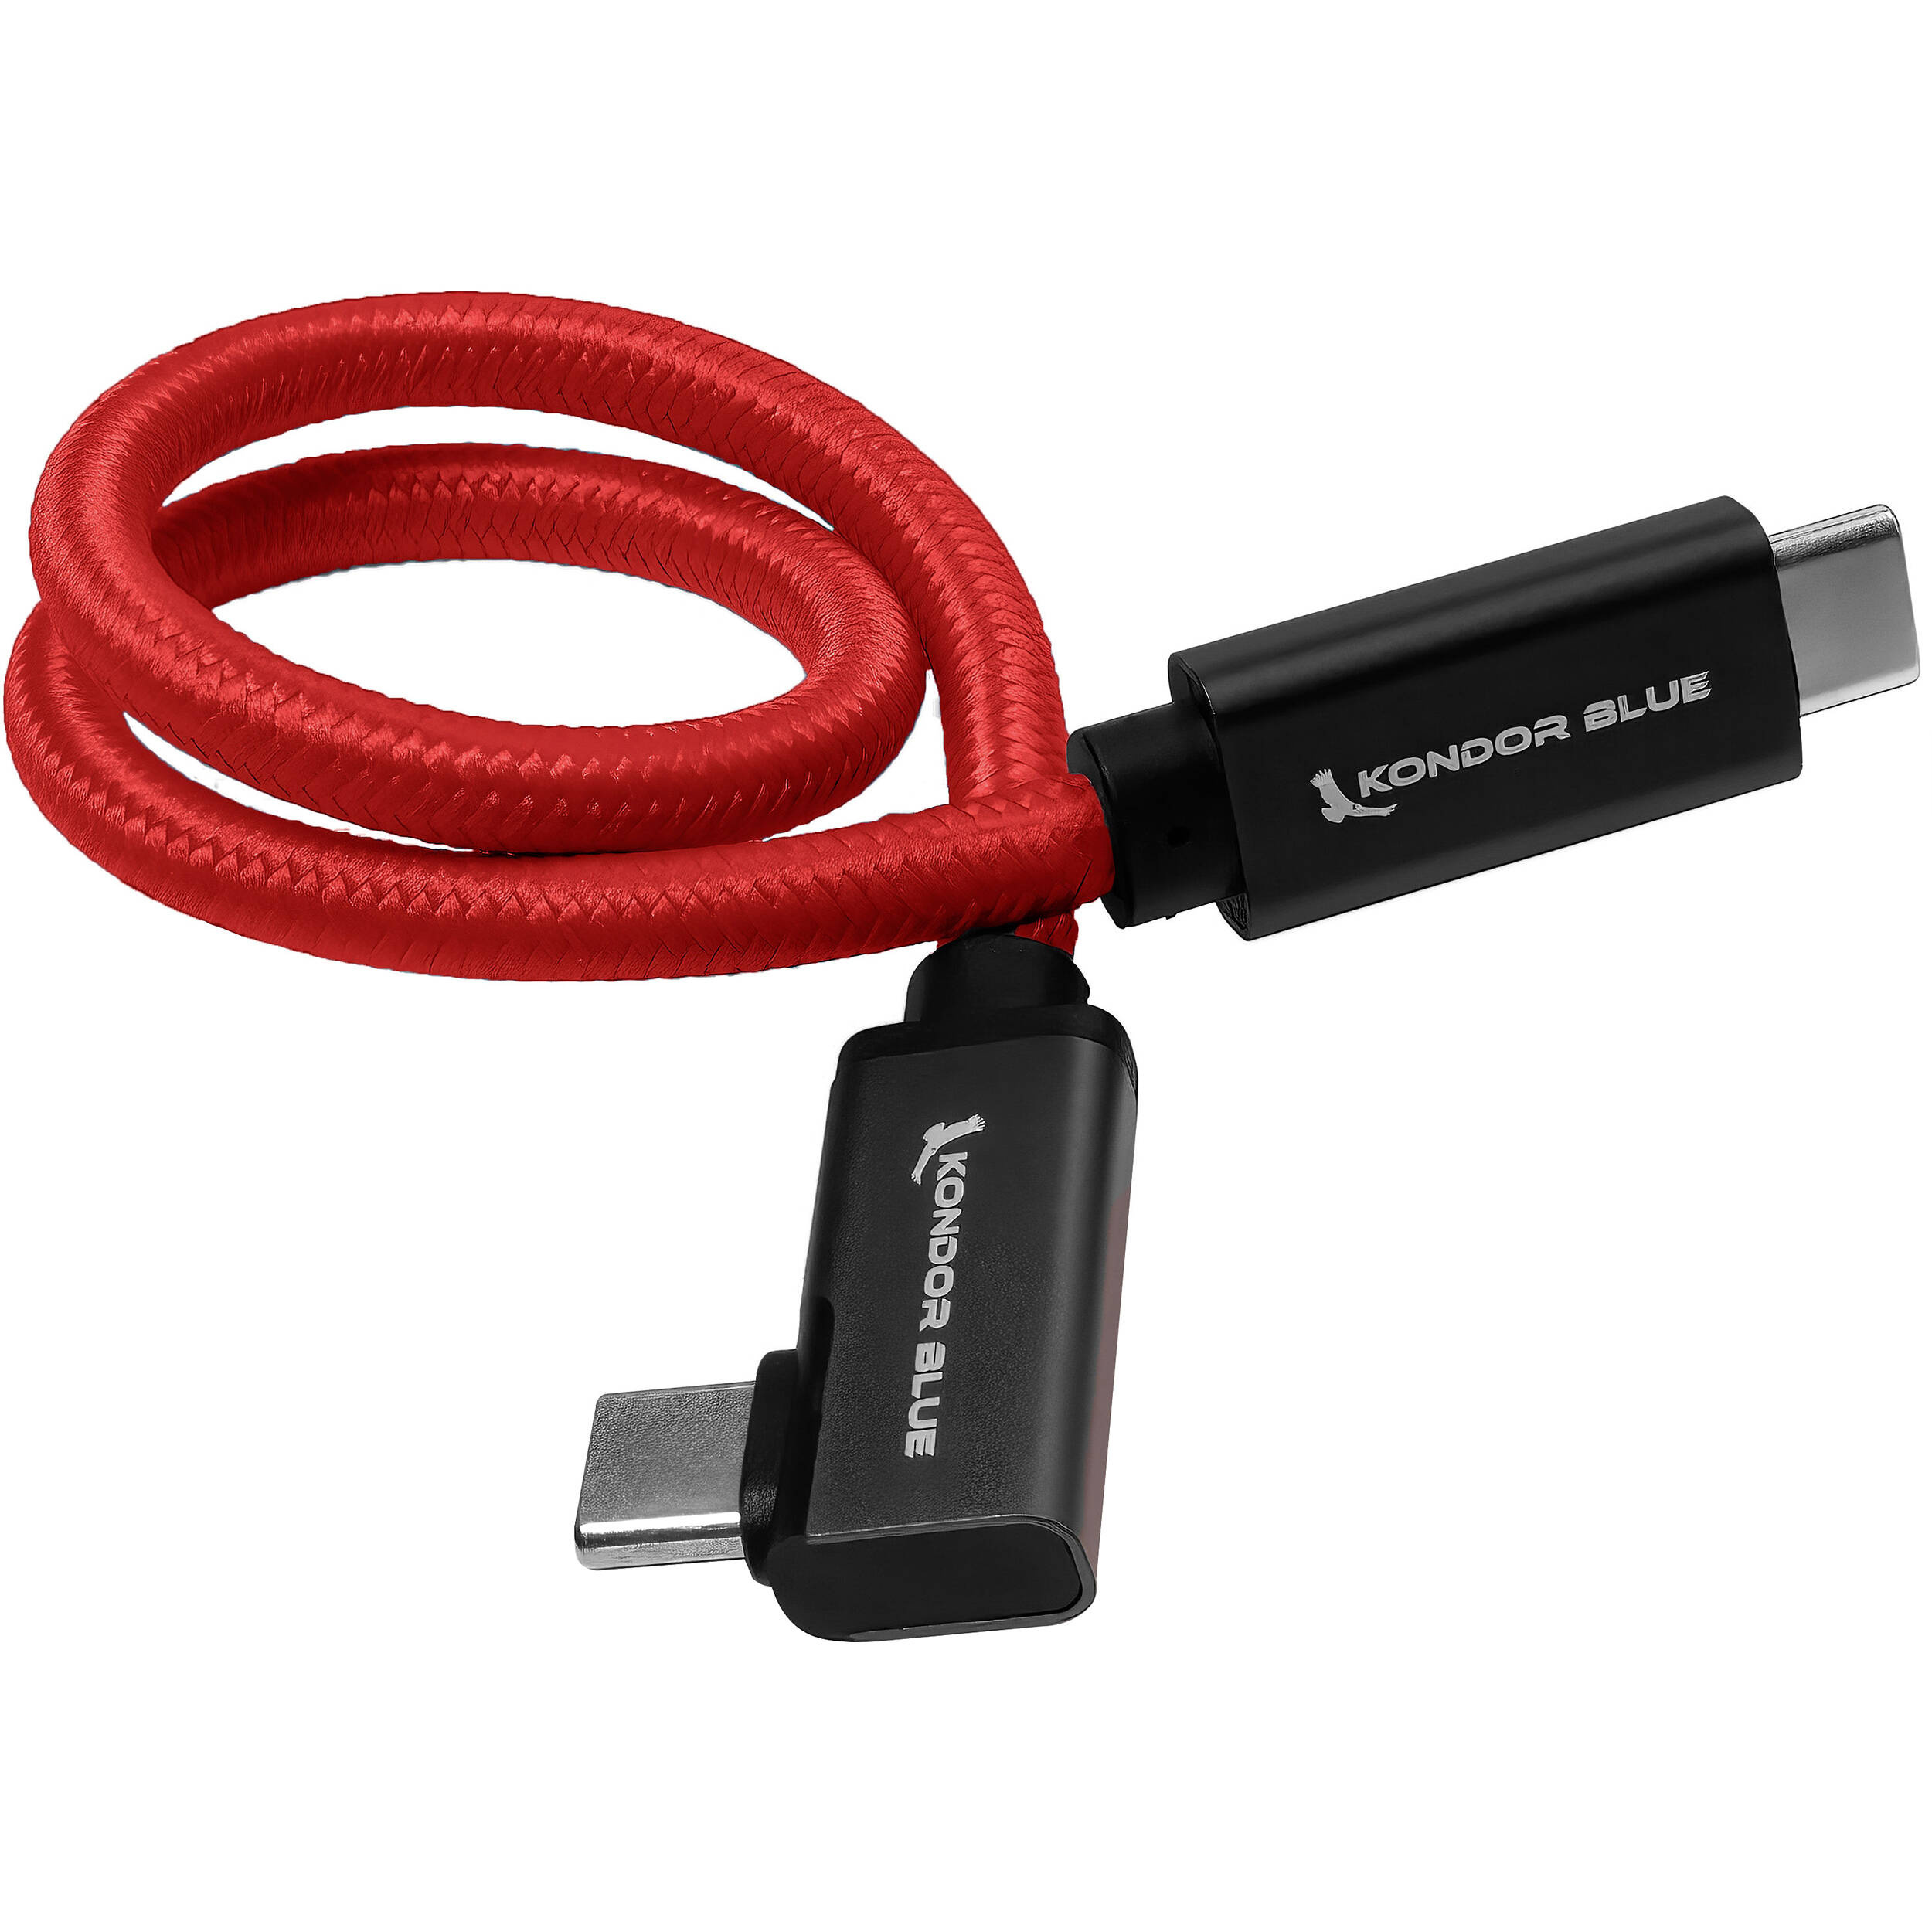 Kondor Blue Right-Angle USB-C 3.1 Gen 2 Cable (30cm, Cardinal Red)